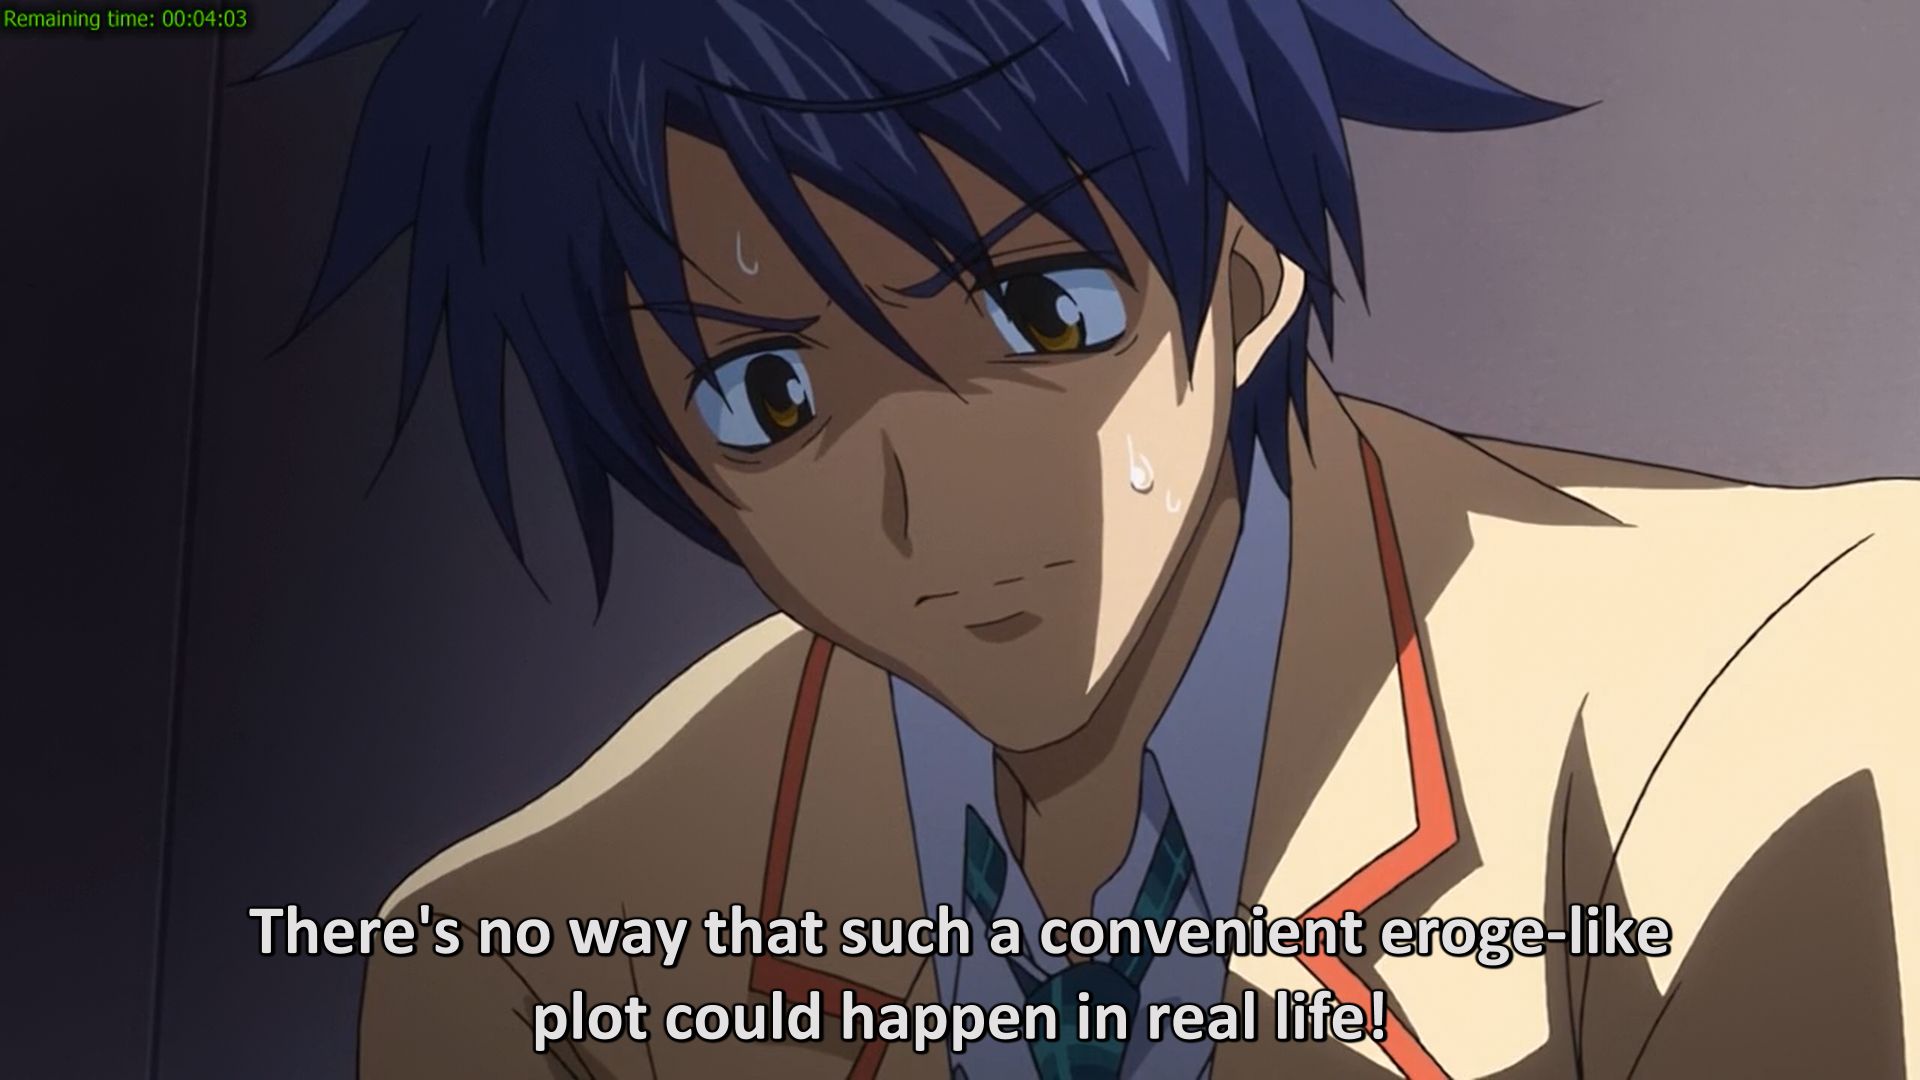 What he said is completely on the mark, but what he forgets is that he is in an anime series, not in real-life.